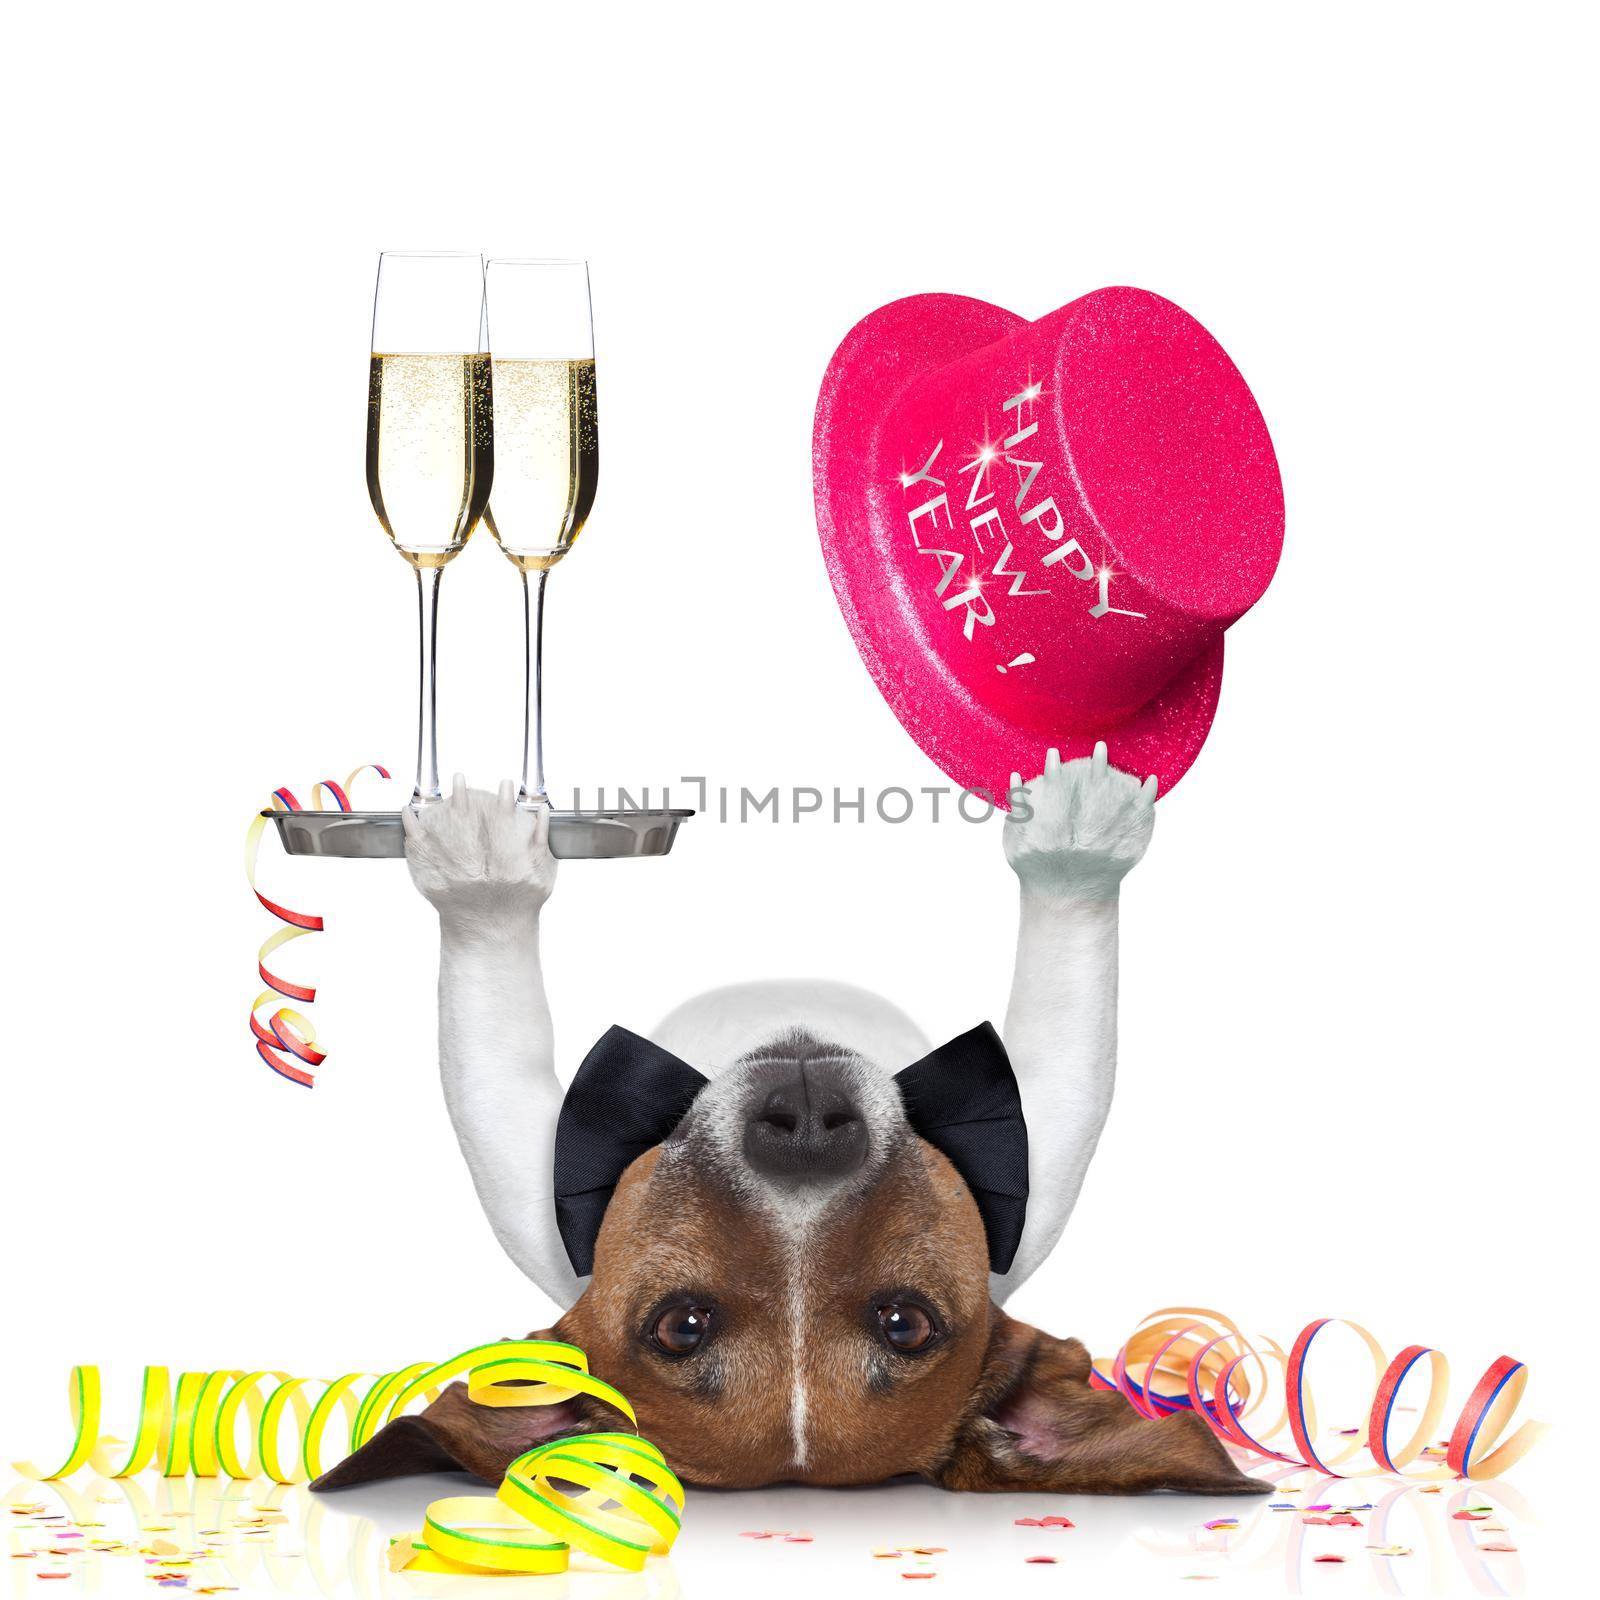 new years eve dog by Brosch